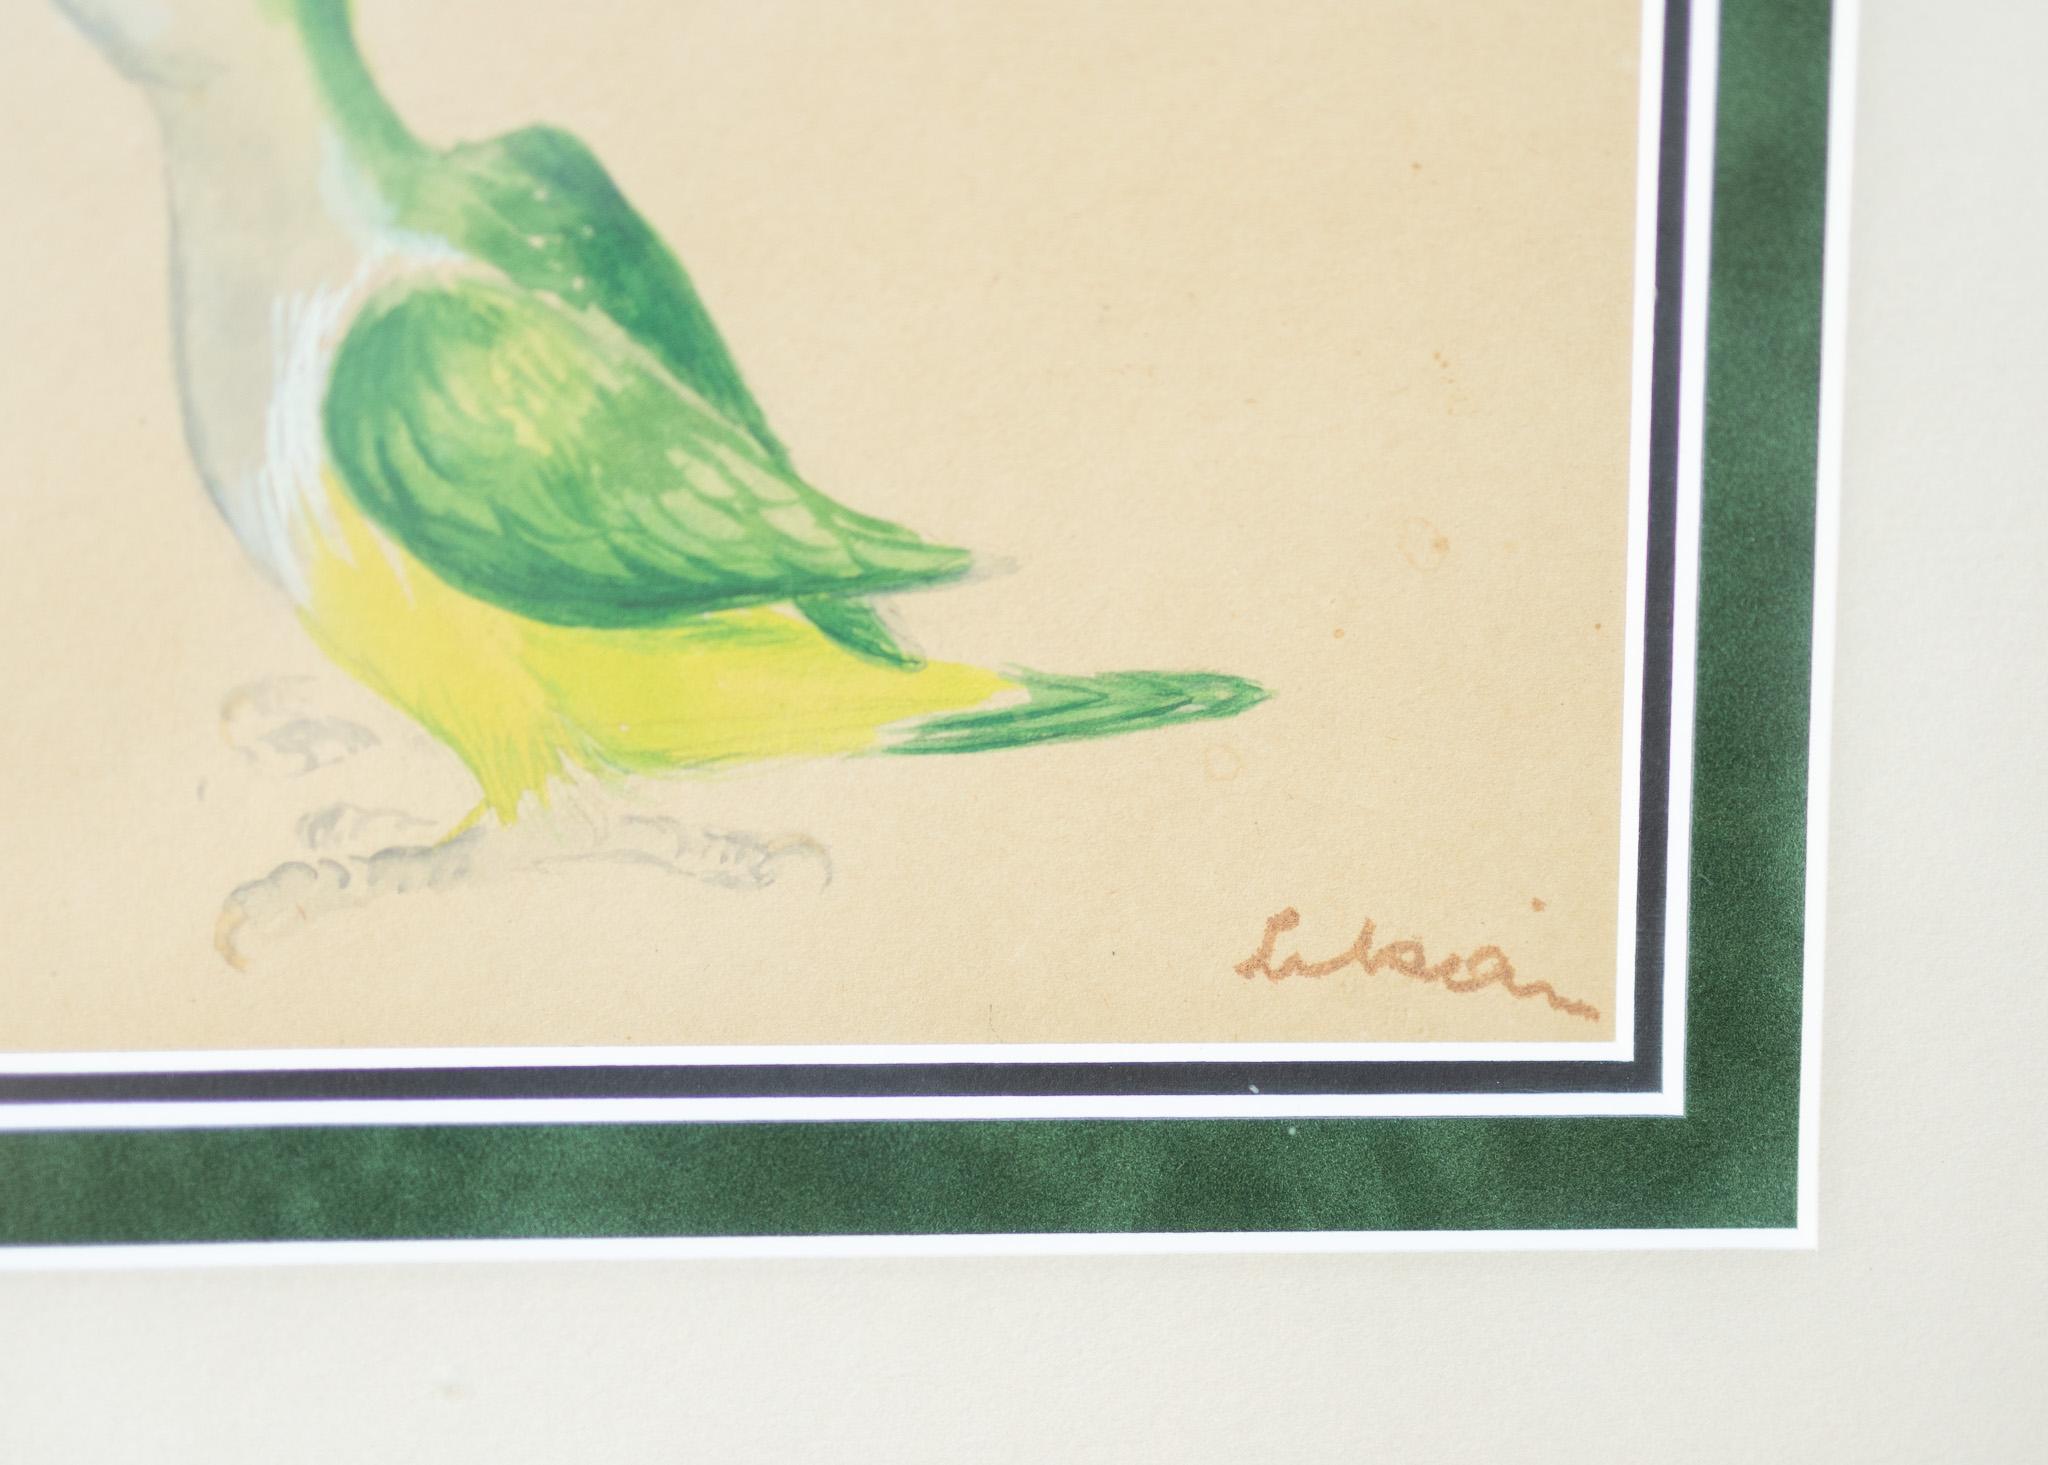 By Gustav Likan
A painting of a green aThis pieces is from the Eva Perón commissioned mural sketch collection from Likan's time as a commissioned artist in Argentina between 1950 and 1952.
4